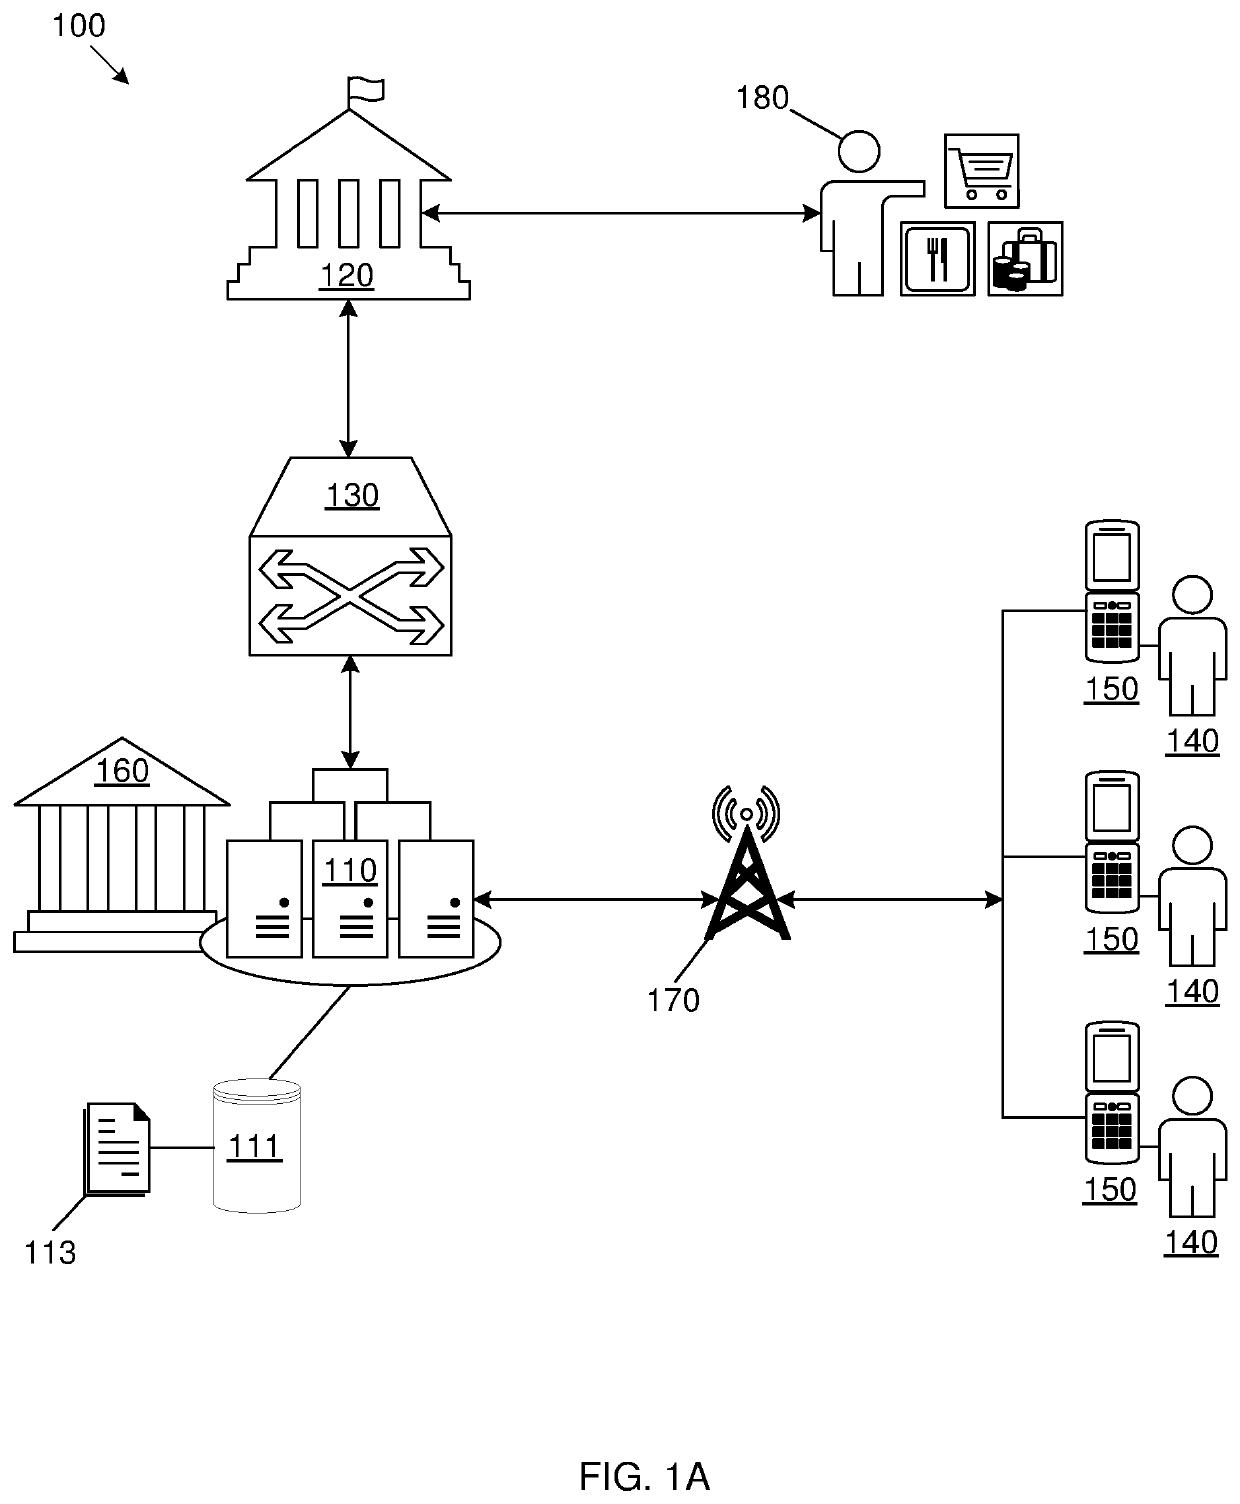 System and method for authorizing direct debit transactions